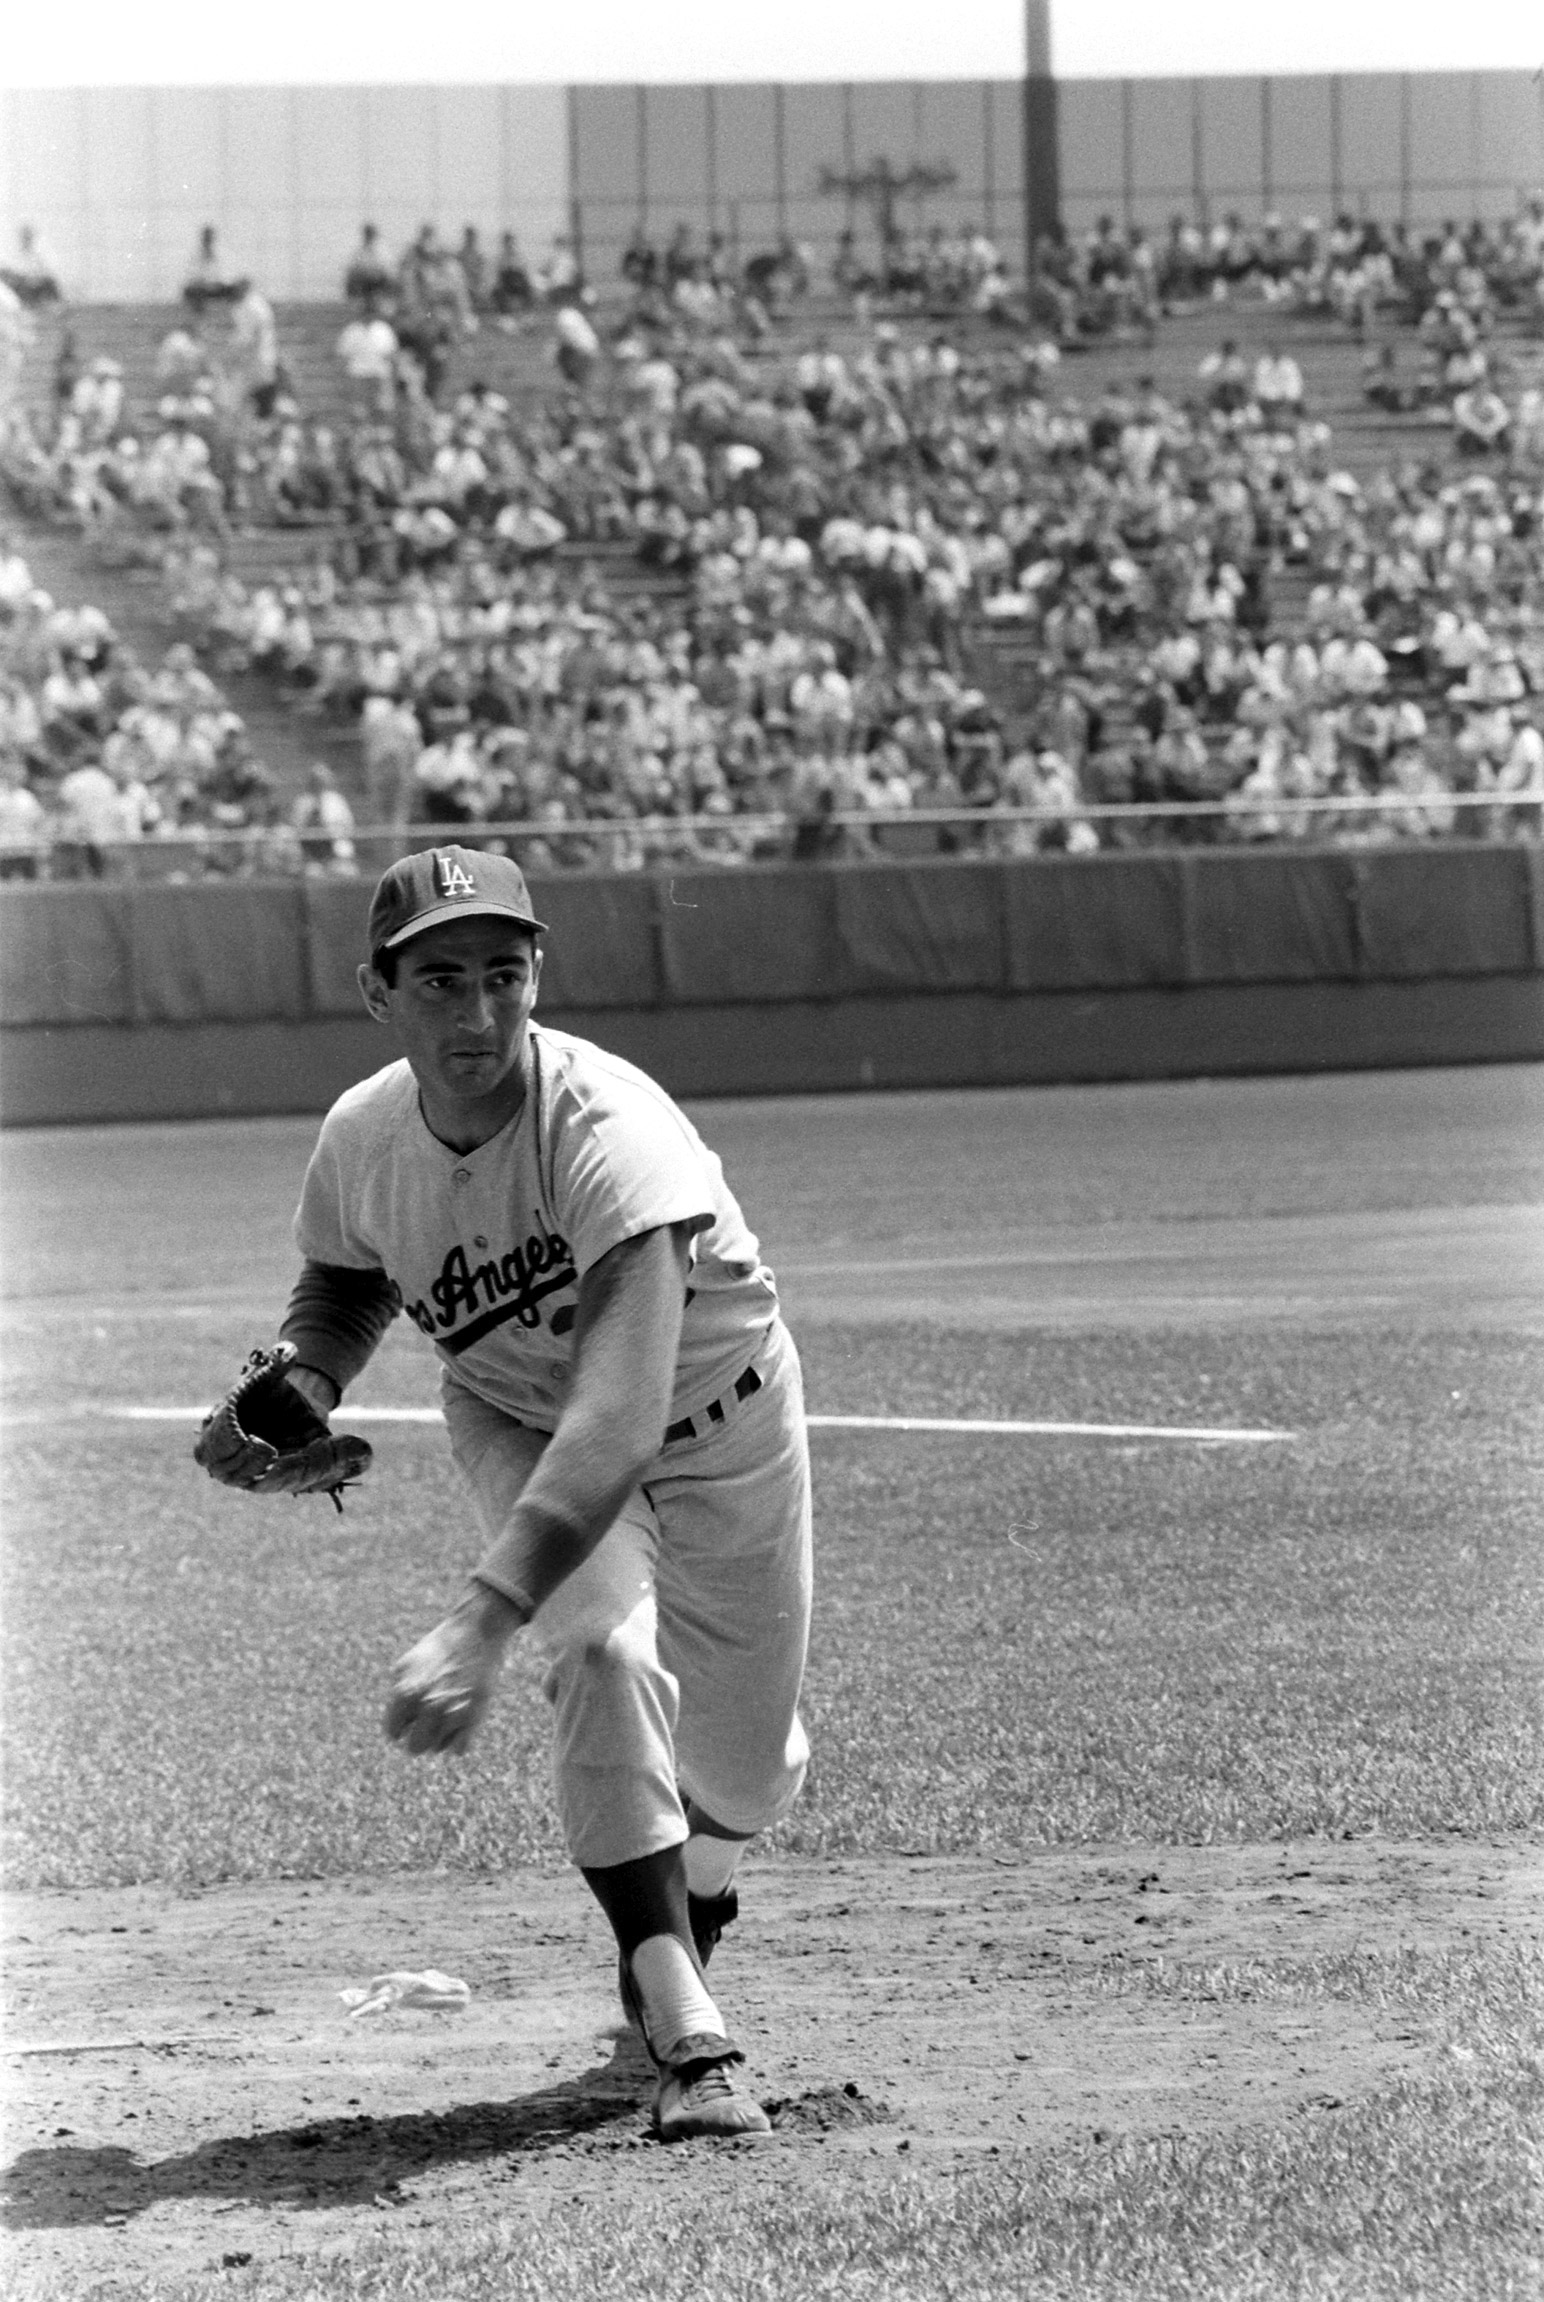 Los Angeles Dodgers pitcher Sandy Koufax in action during a game against the Milwaukee Braves. 1963.